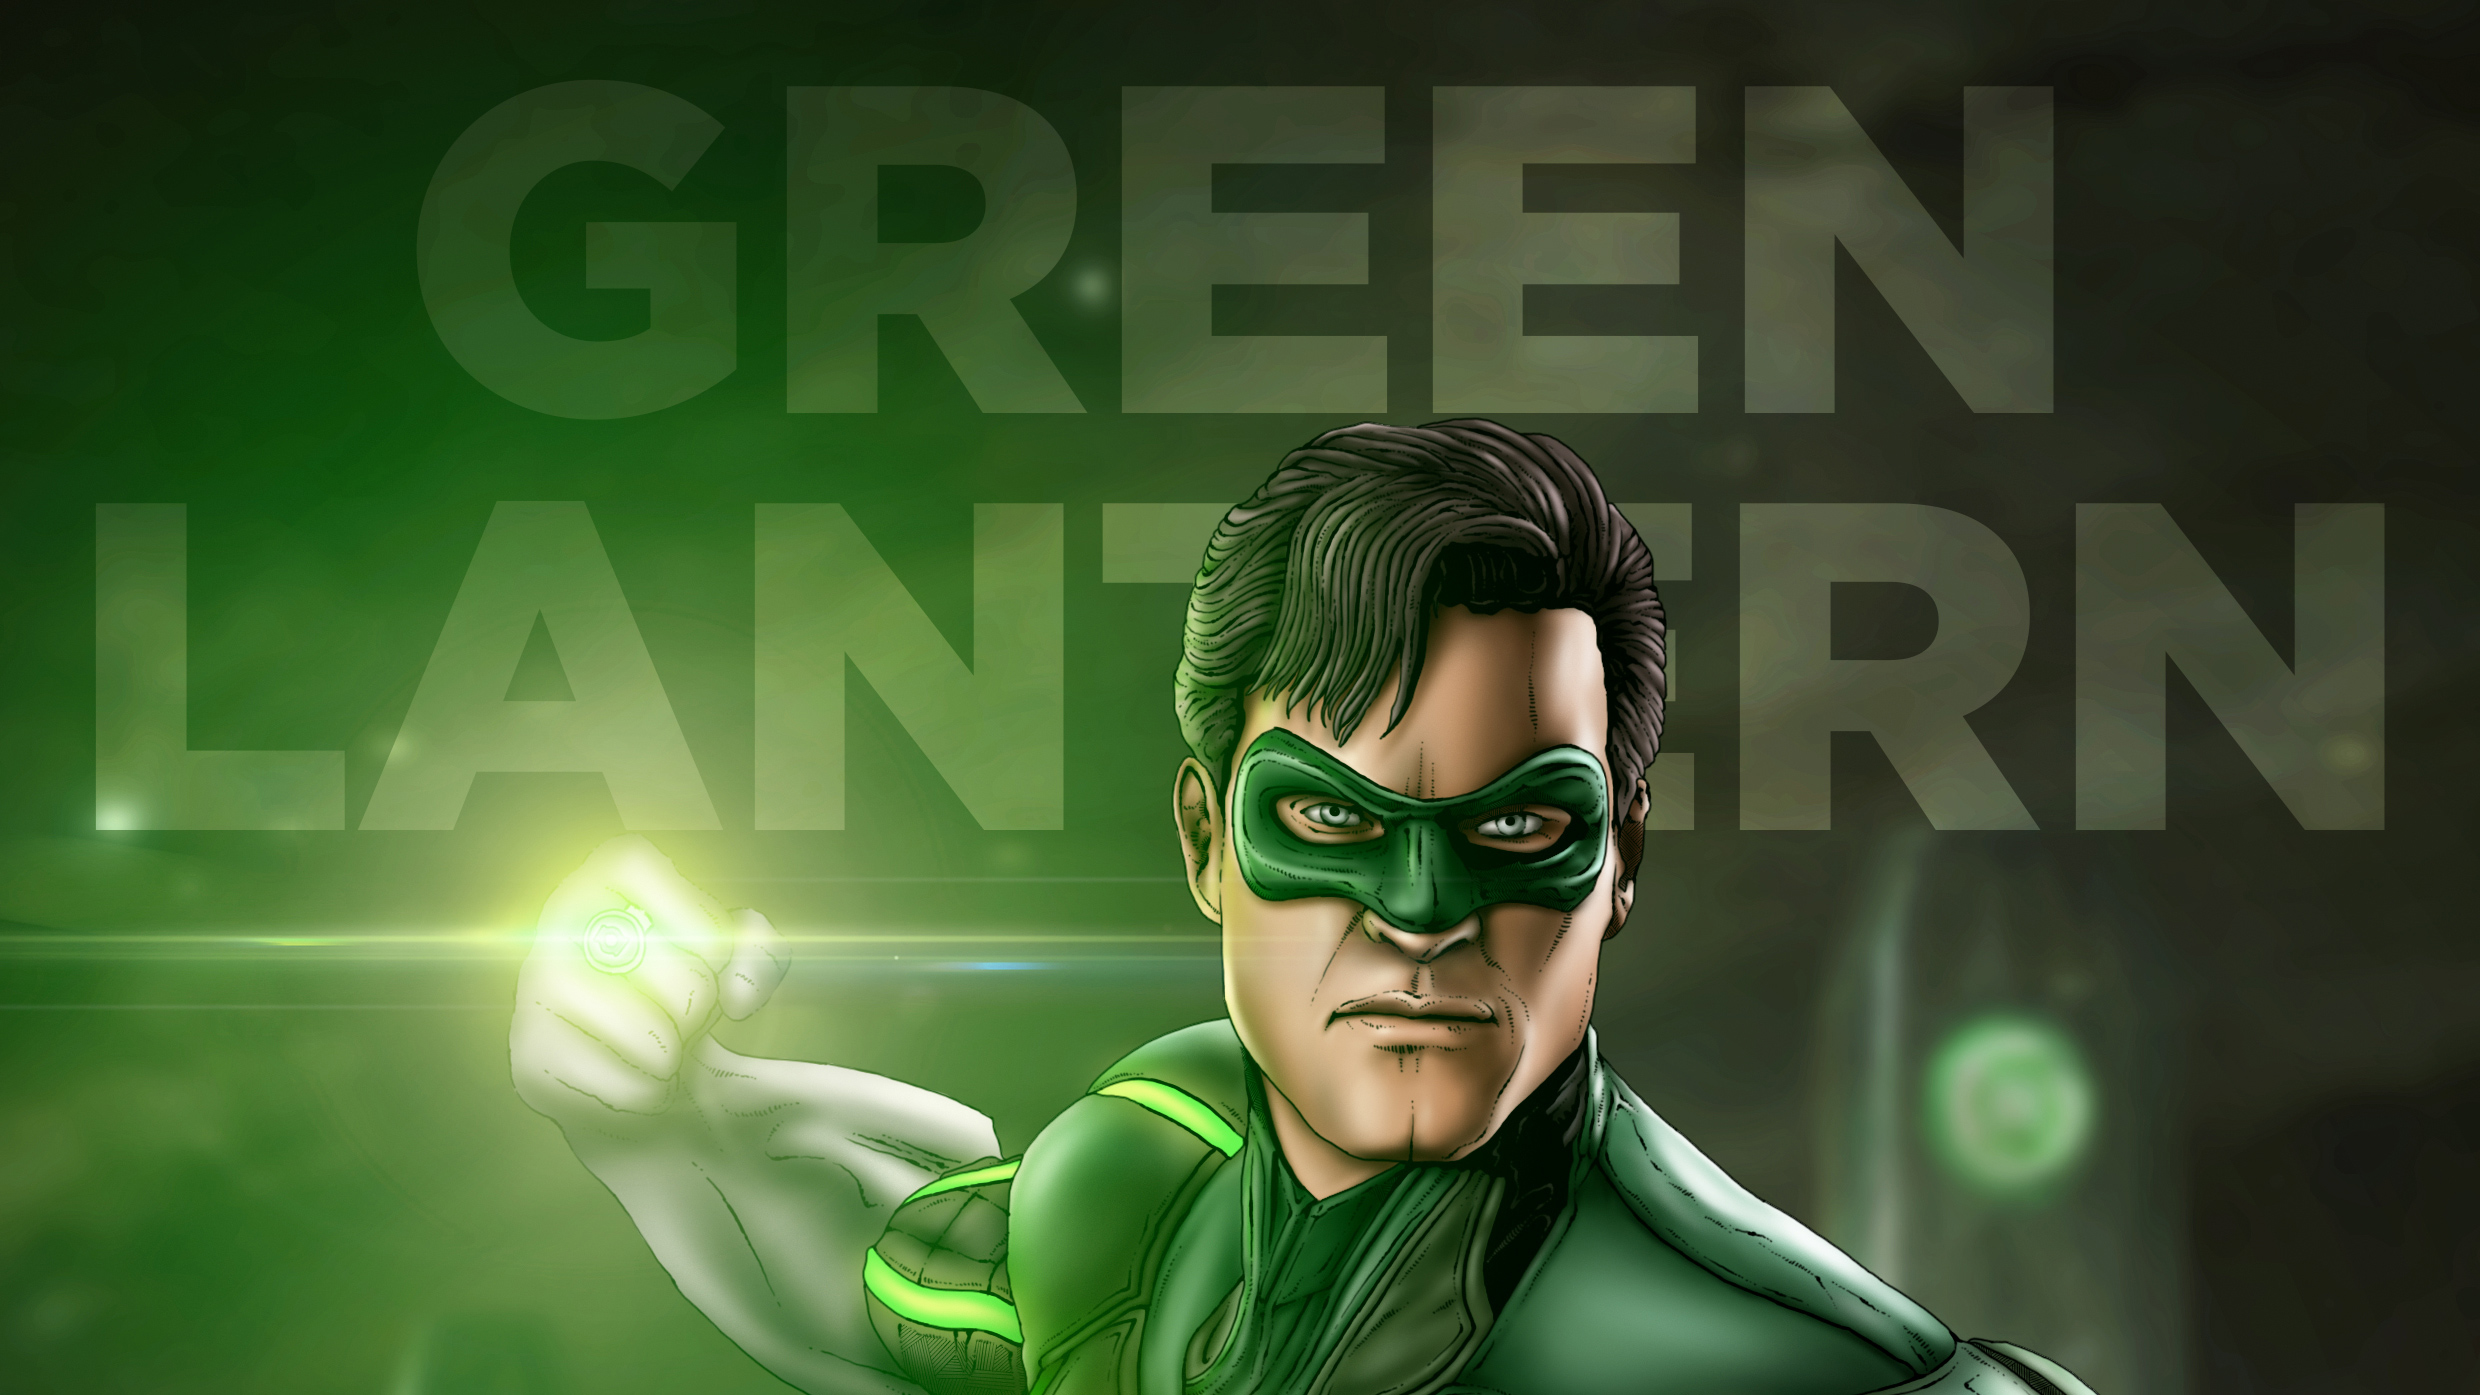 Green Lantern Artwork, HD Superheroes, 4k Wallpaper, Image, Background, Photo and Picture